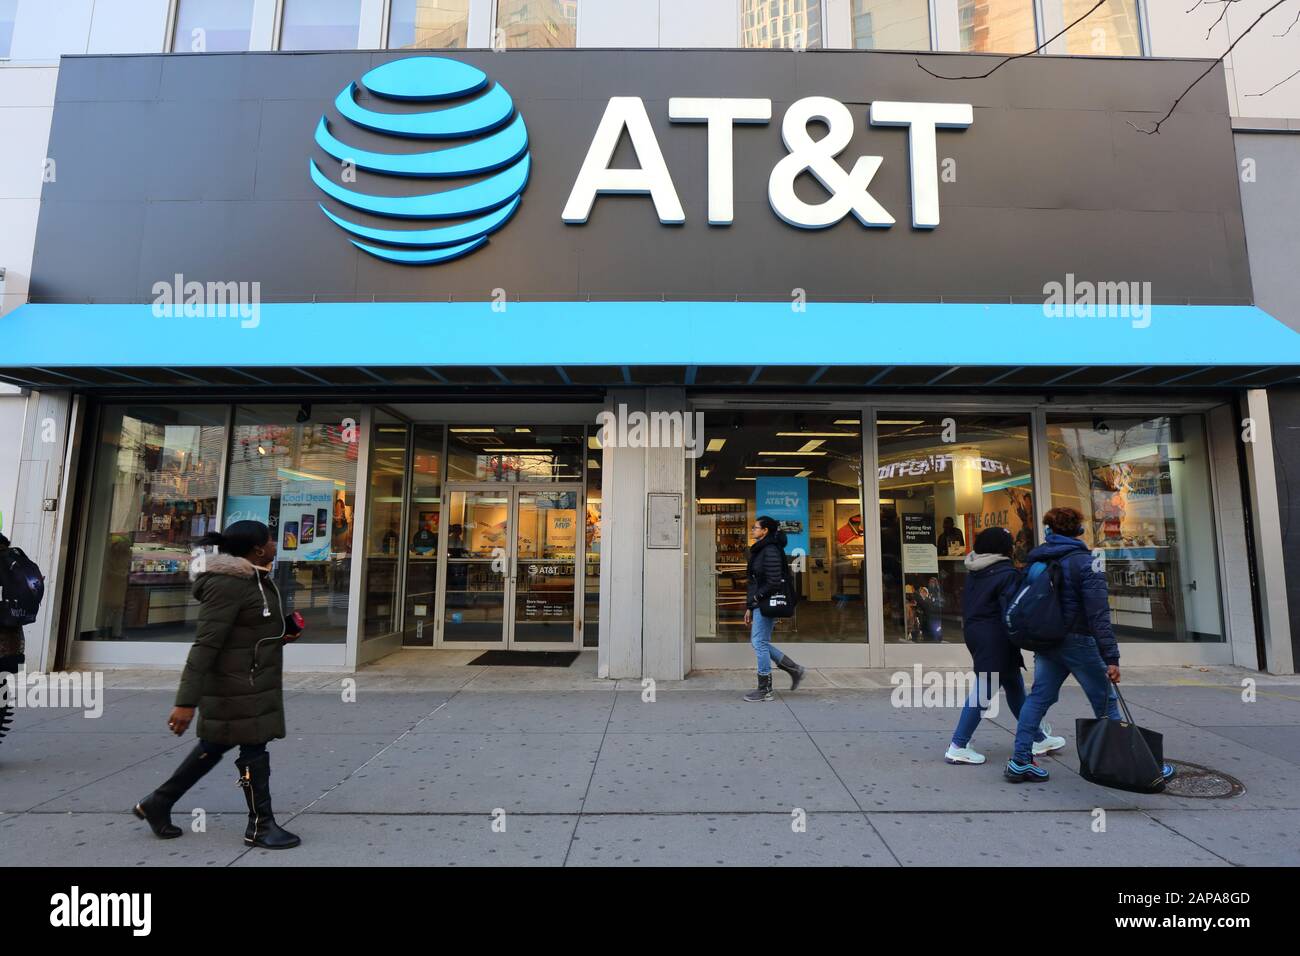 AT&T Store, 476-478 Fulton St, Brooklyn, NY. the gigantic logo of a telecommunications company and cellphone shop overlook shoppers on the Fulton Mall Stock Photo